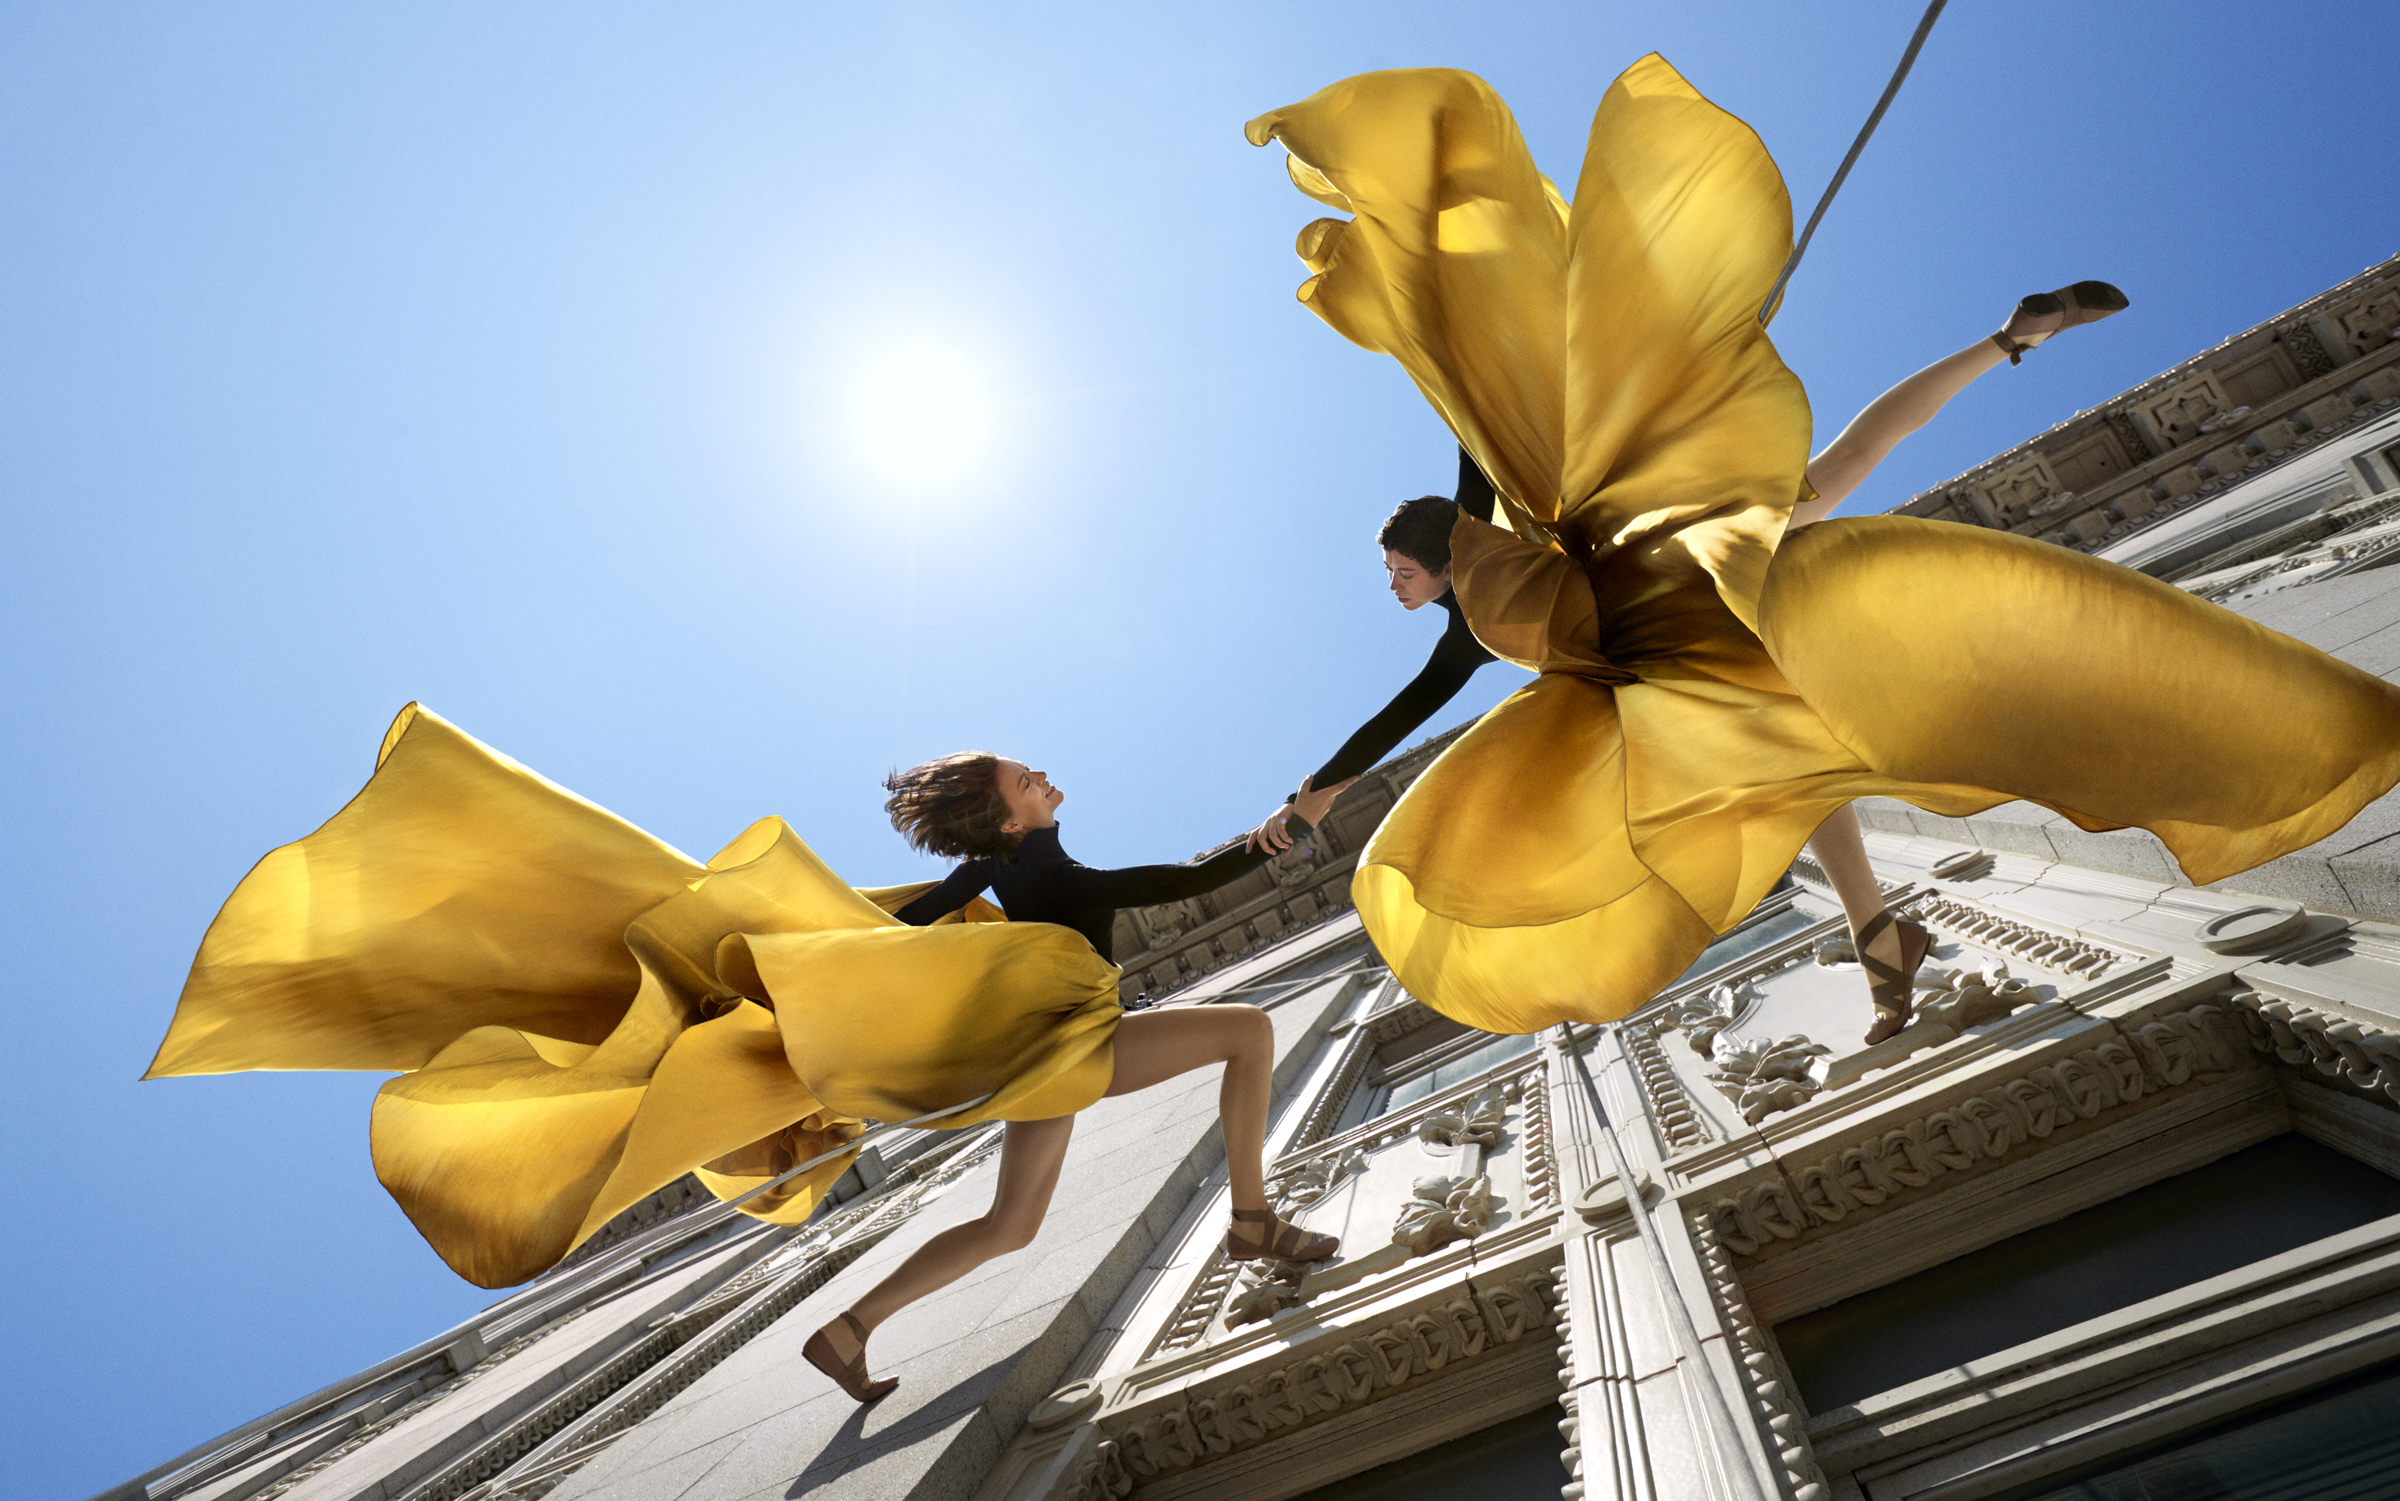 Dancers with flying yellow skirts dance while suspended against a building wall